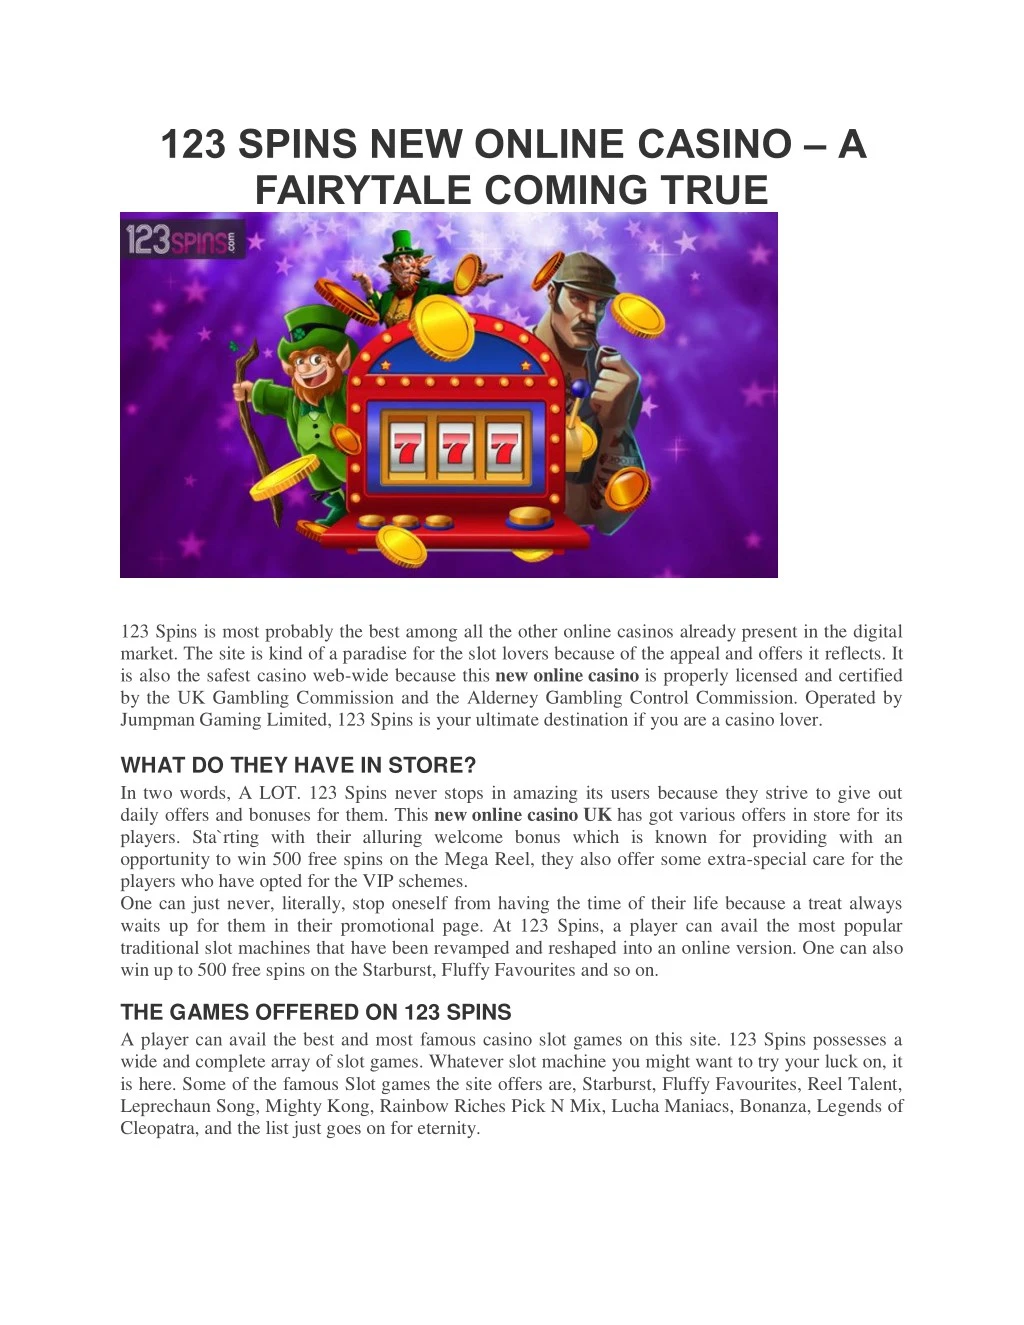 123 spins new online casino a fairytale coming